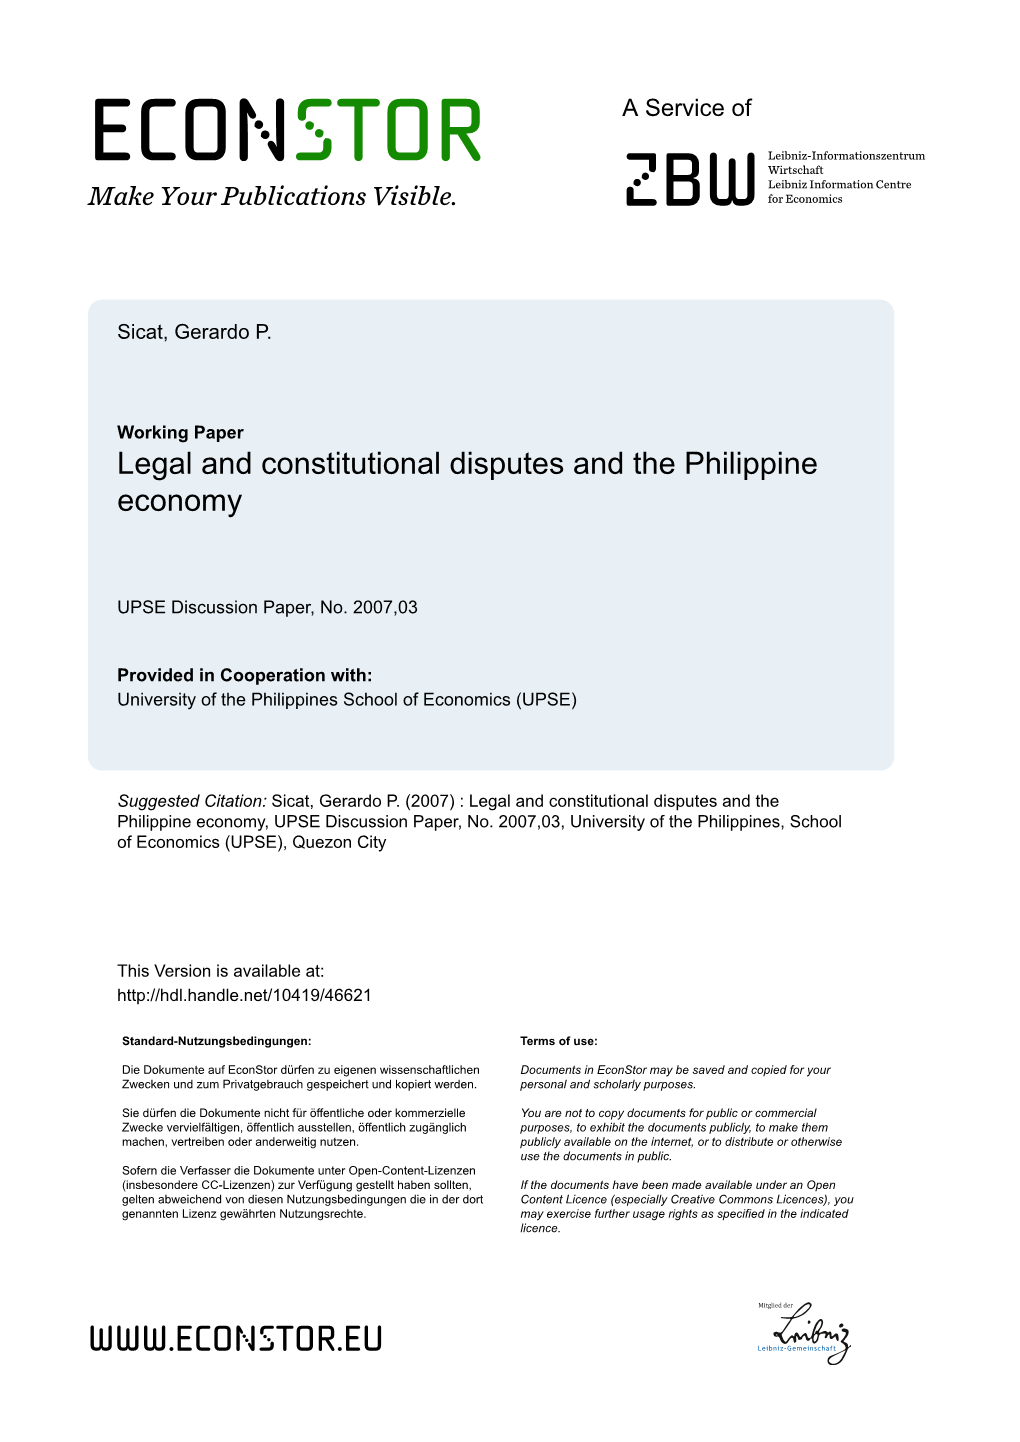 Legal and Constitutional Disputes and the Philippine Economy